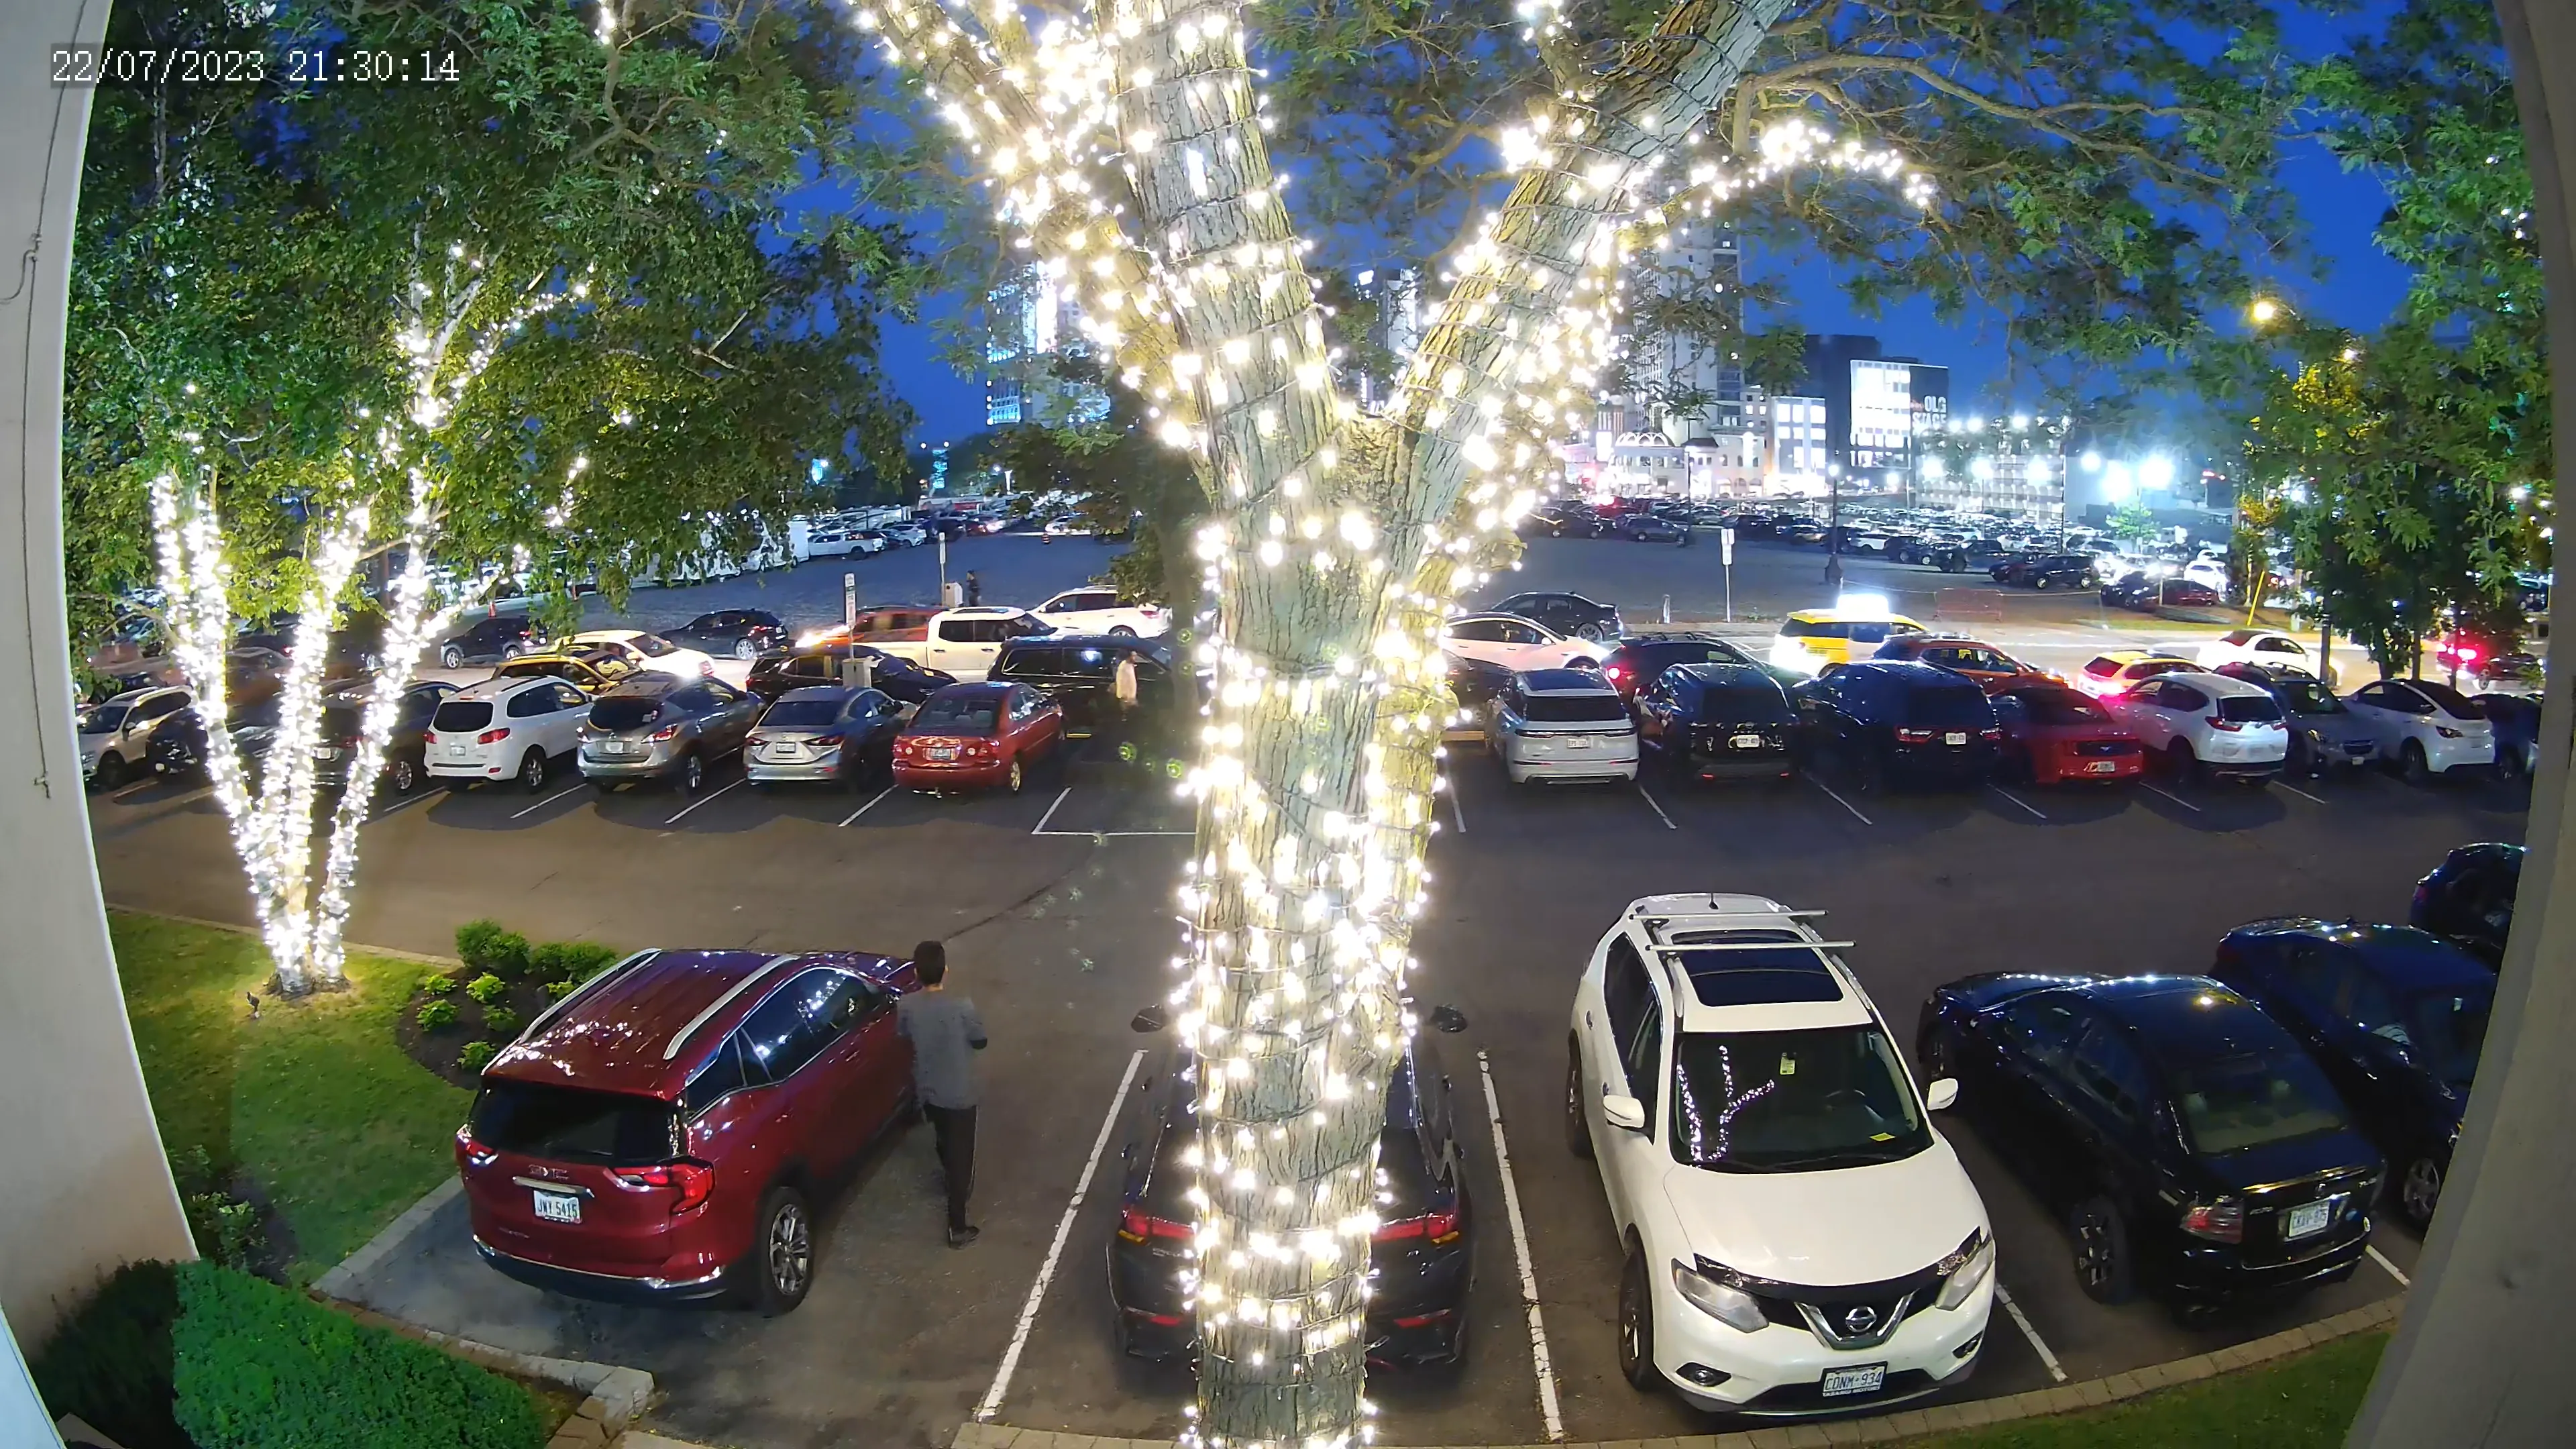 A tree with Christmas lights wrapped around it, in a parking lot full of cars at night